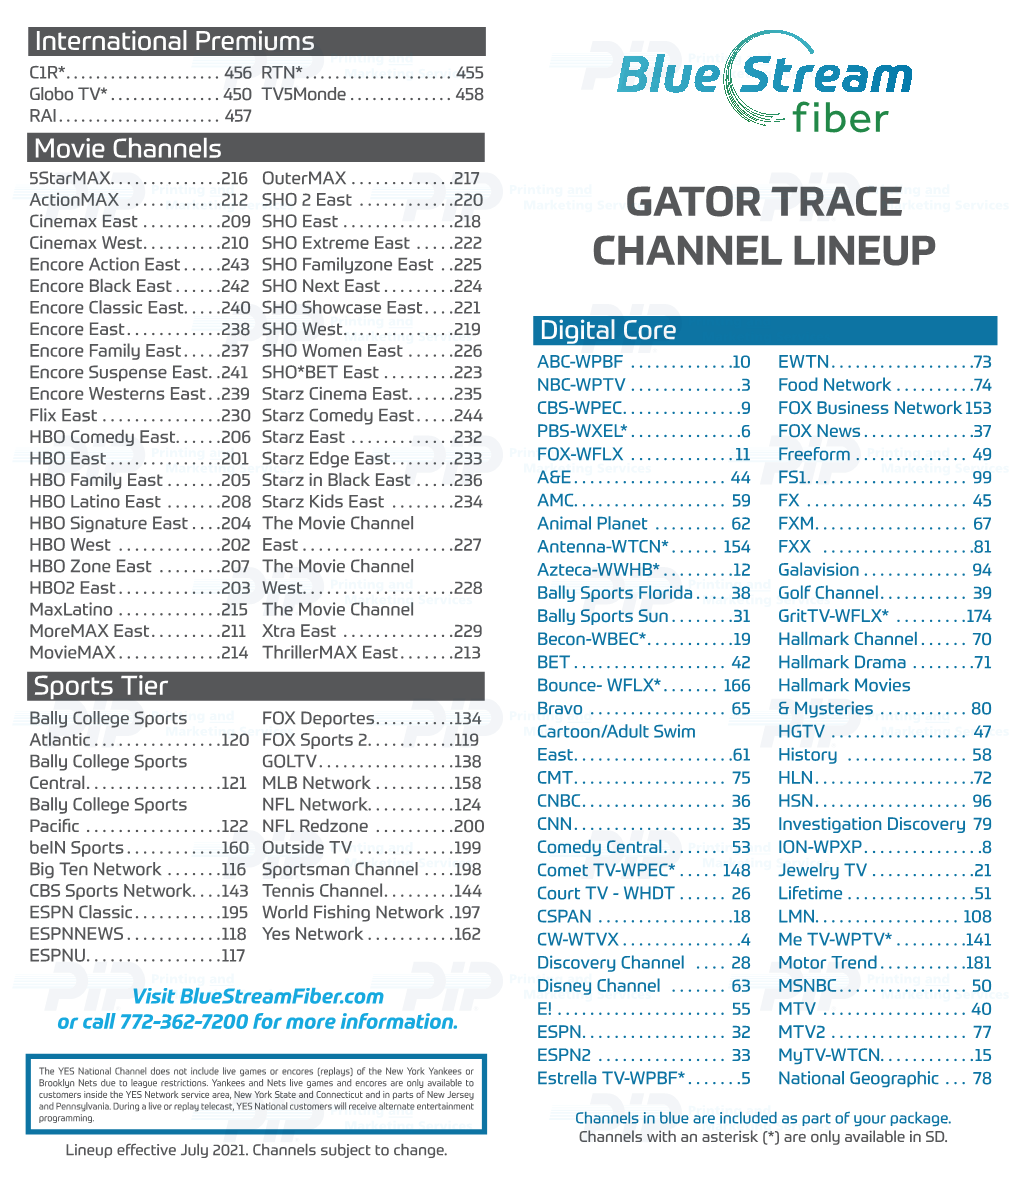 Gator Trace Channel Lineup